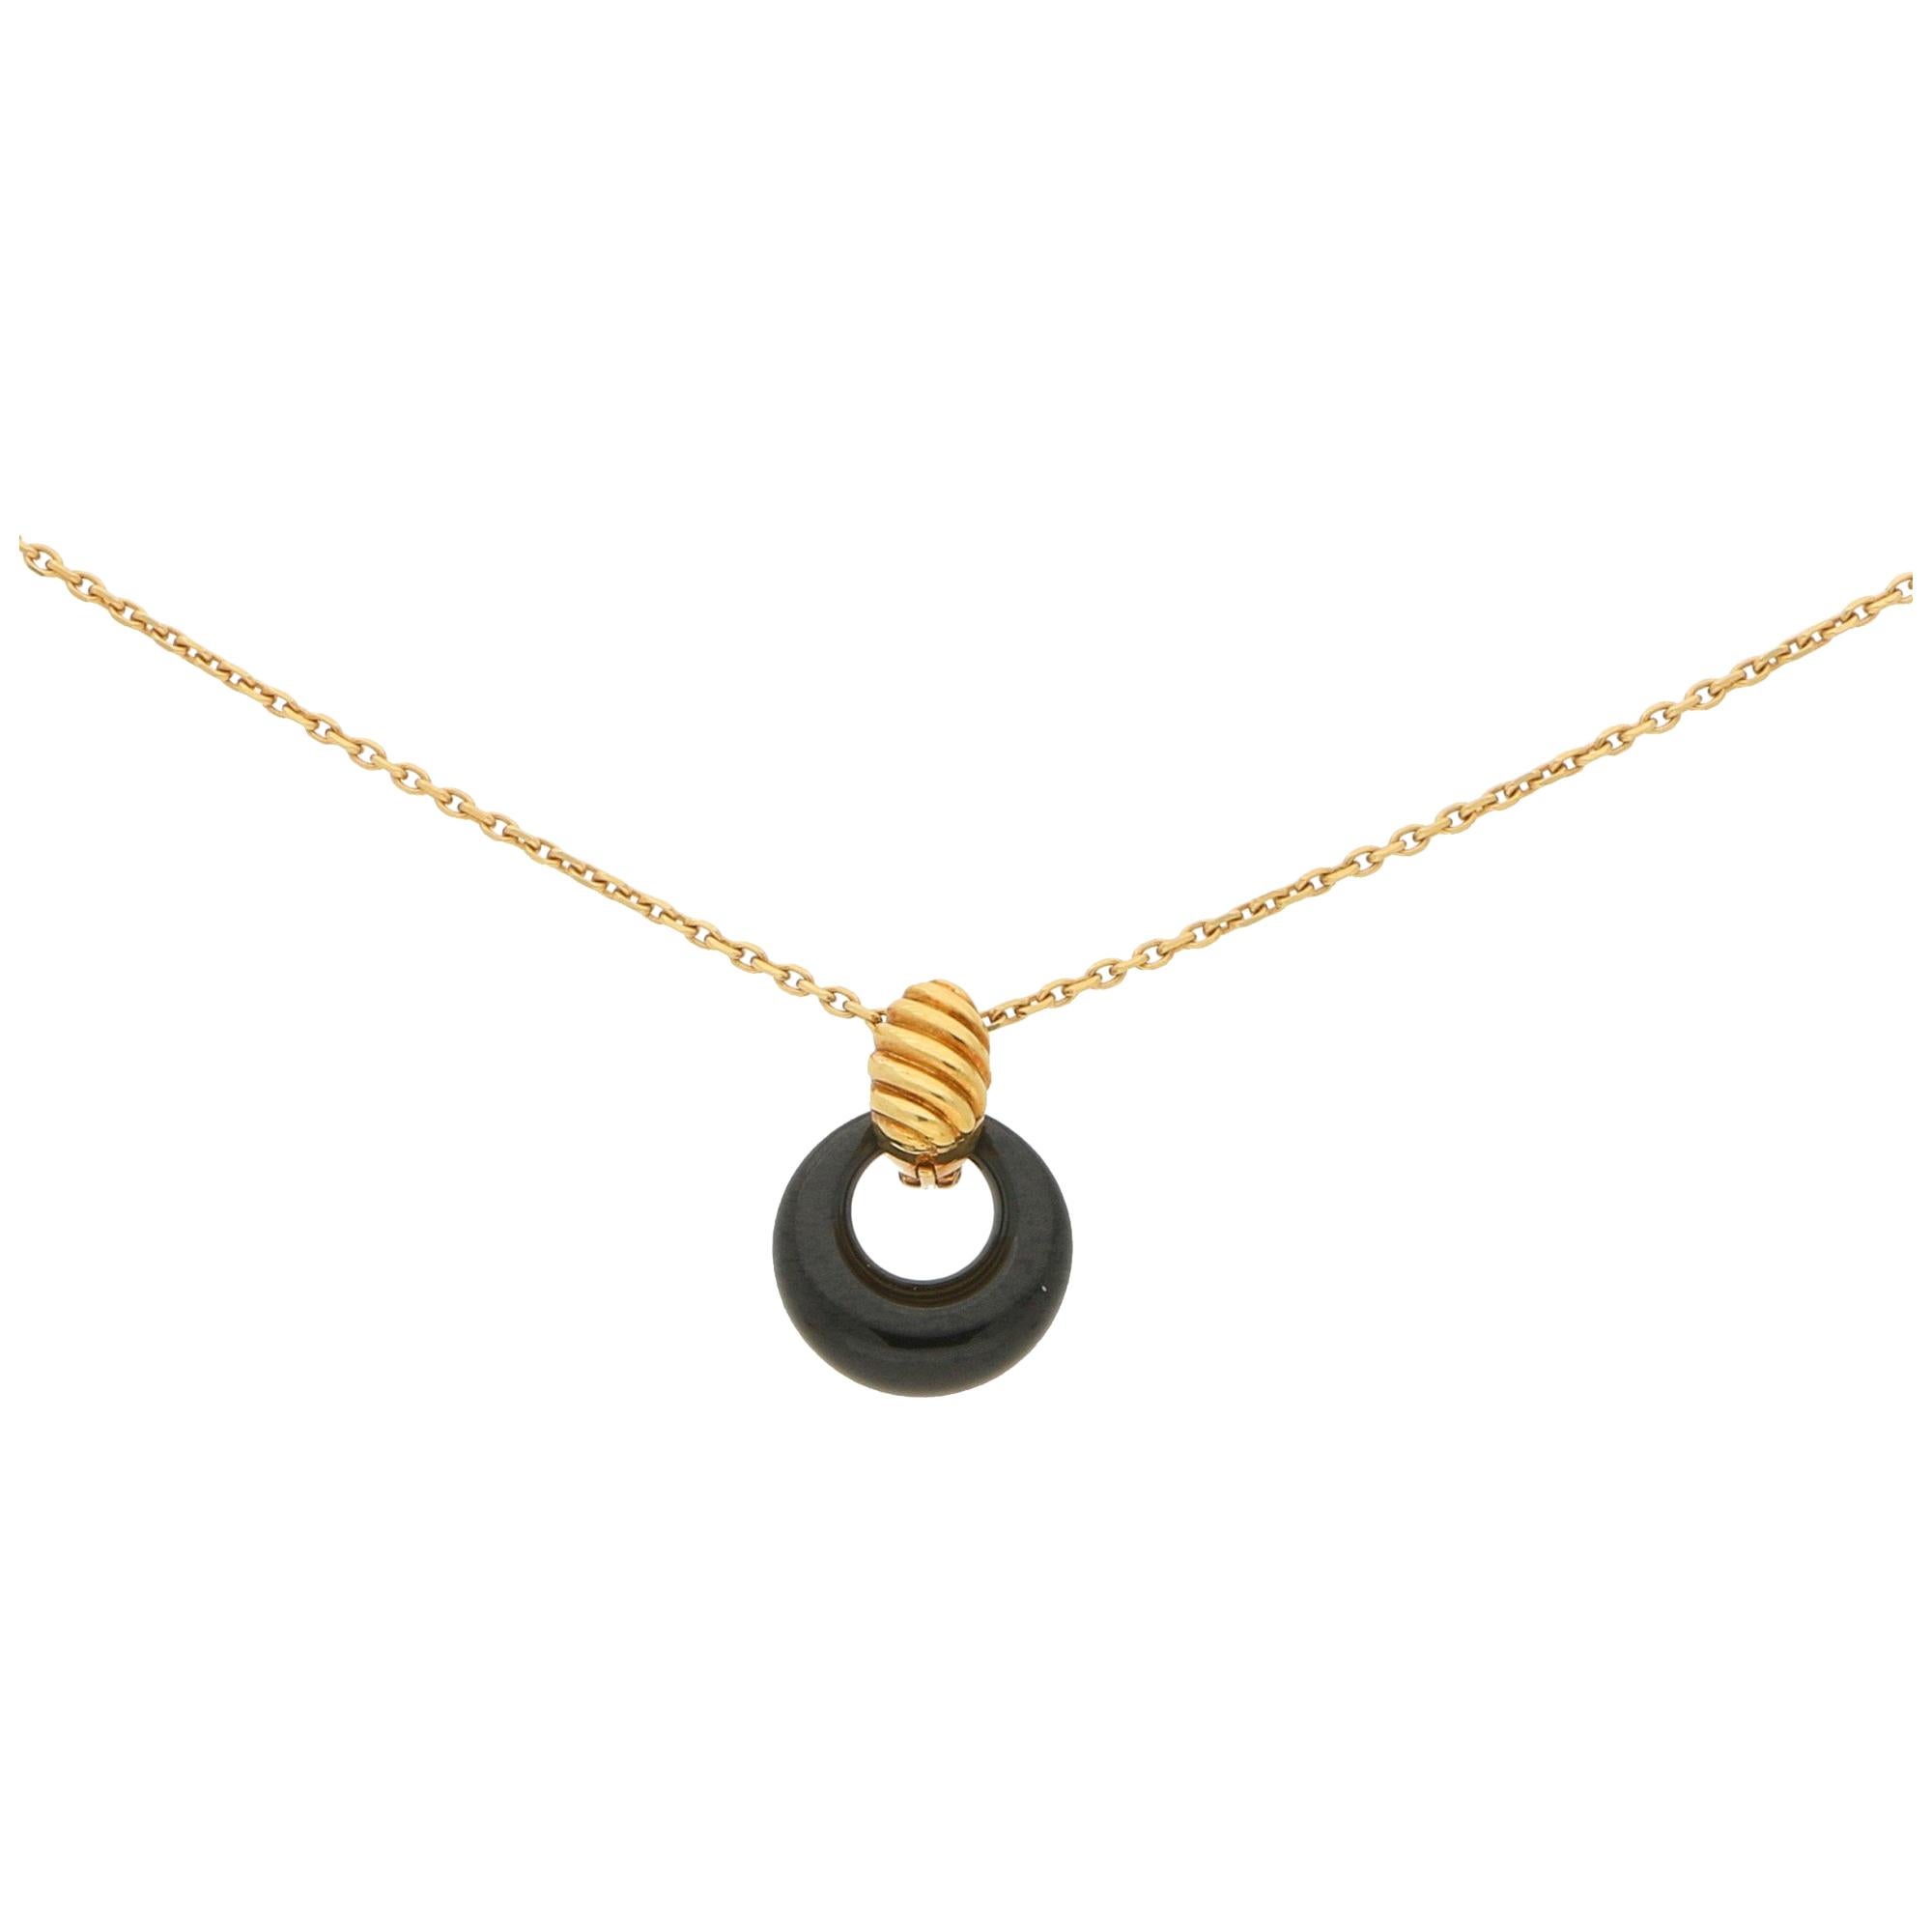 Vintage Van Cleef & Arpels Onyx Pendant Necklace in 18ct Yellow Gold For Sale